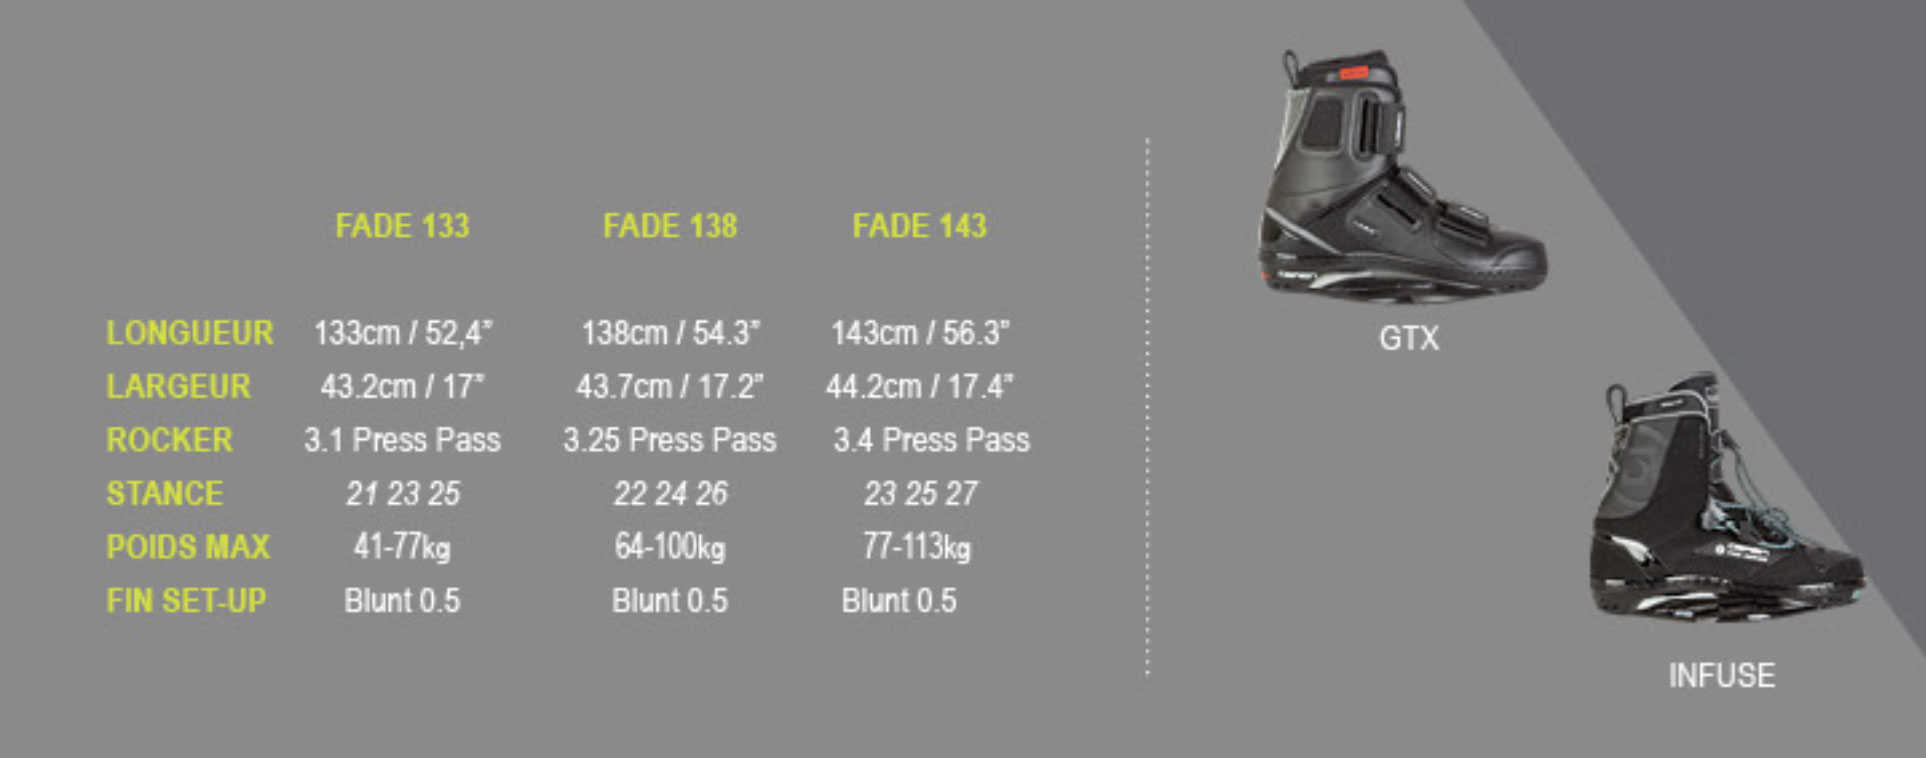 GUIDE-TAILLE_WAKEBOARD-fade-2018